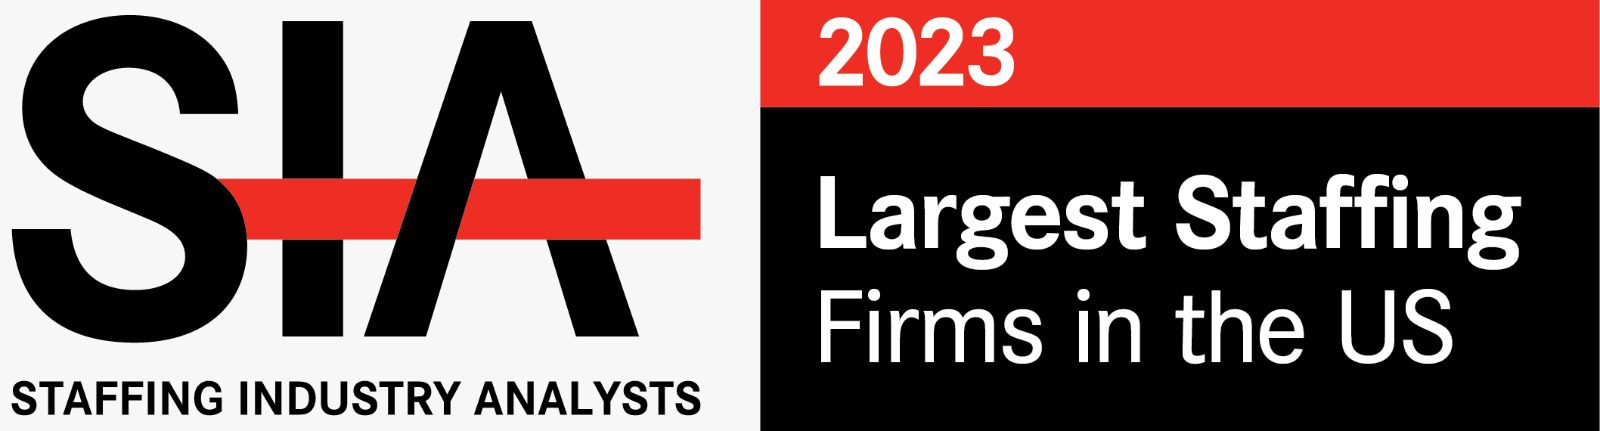 SIA’s Largest Staffing Firms in the US 2023